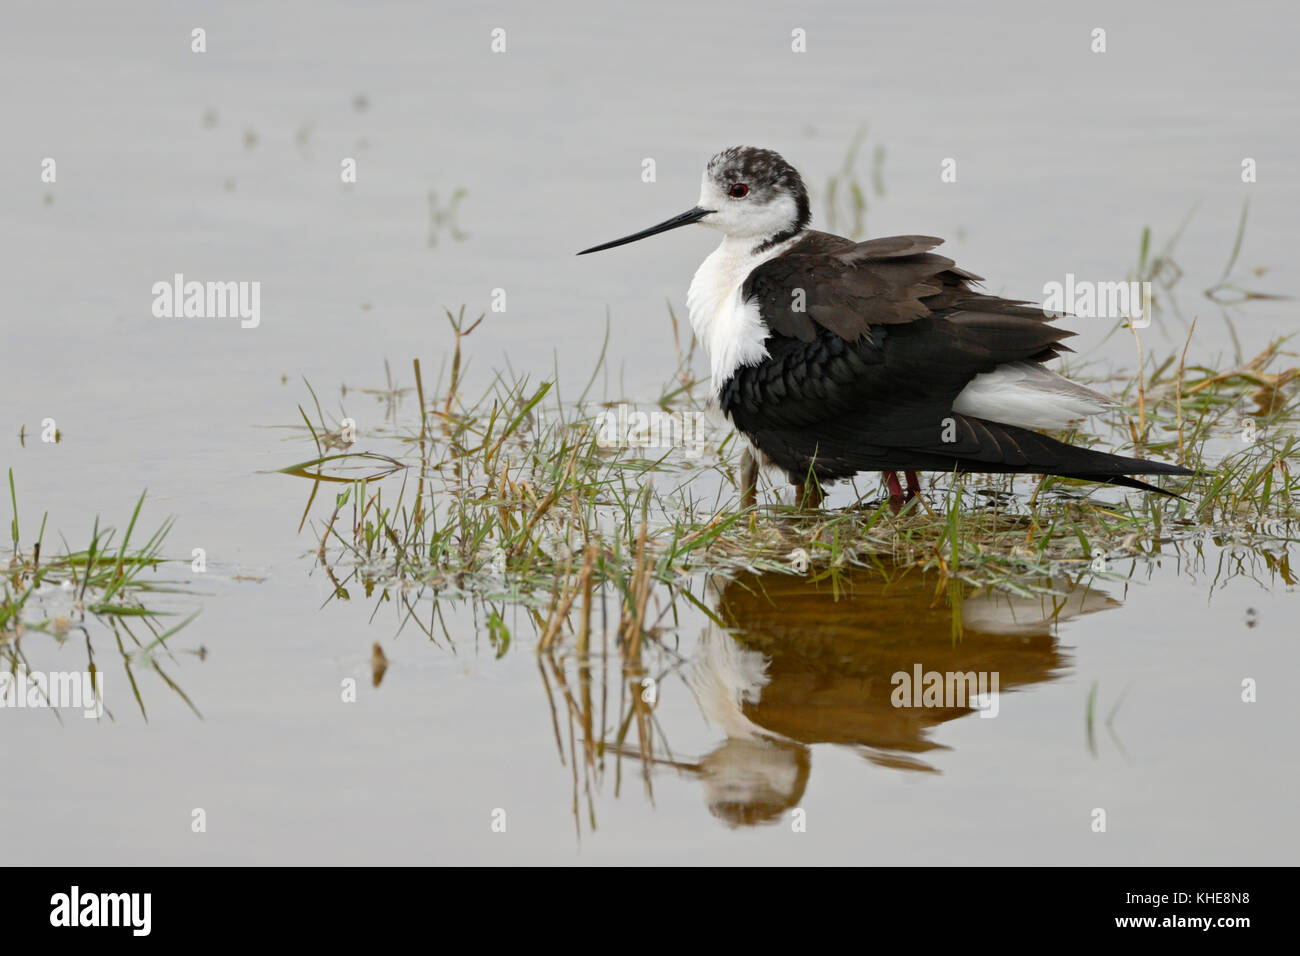 Black-winged Stilt ( Himantopus himantopus ), crouching adult, protecting, gathering chicks under its body, plumage, looks funny, Europe. Stock Photo